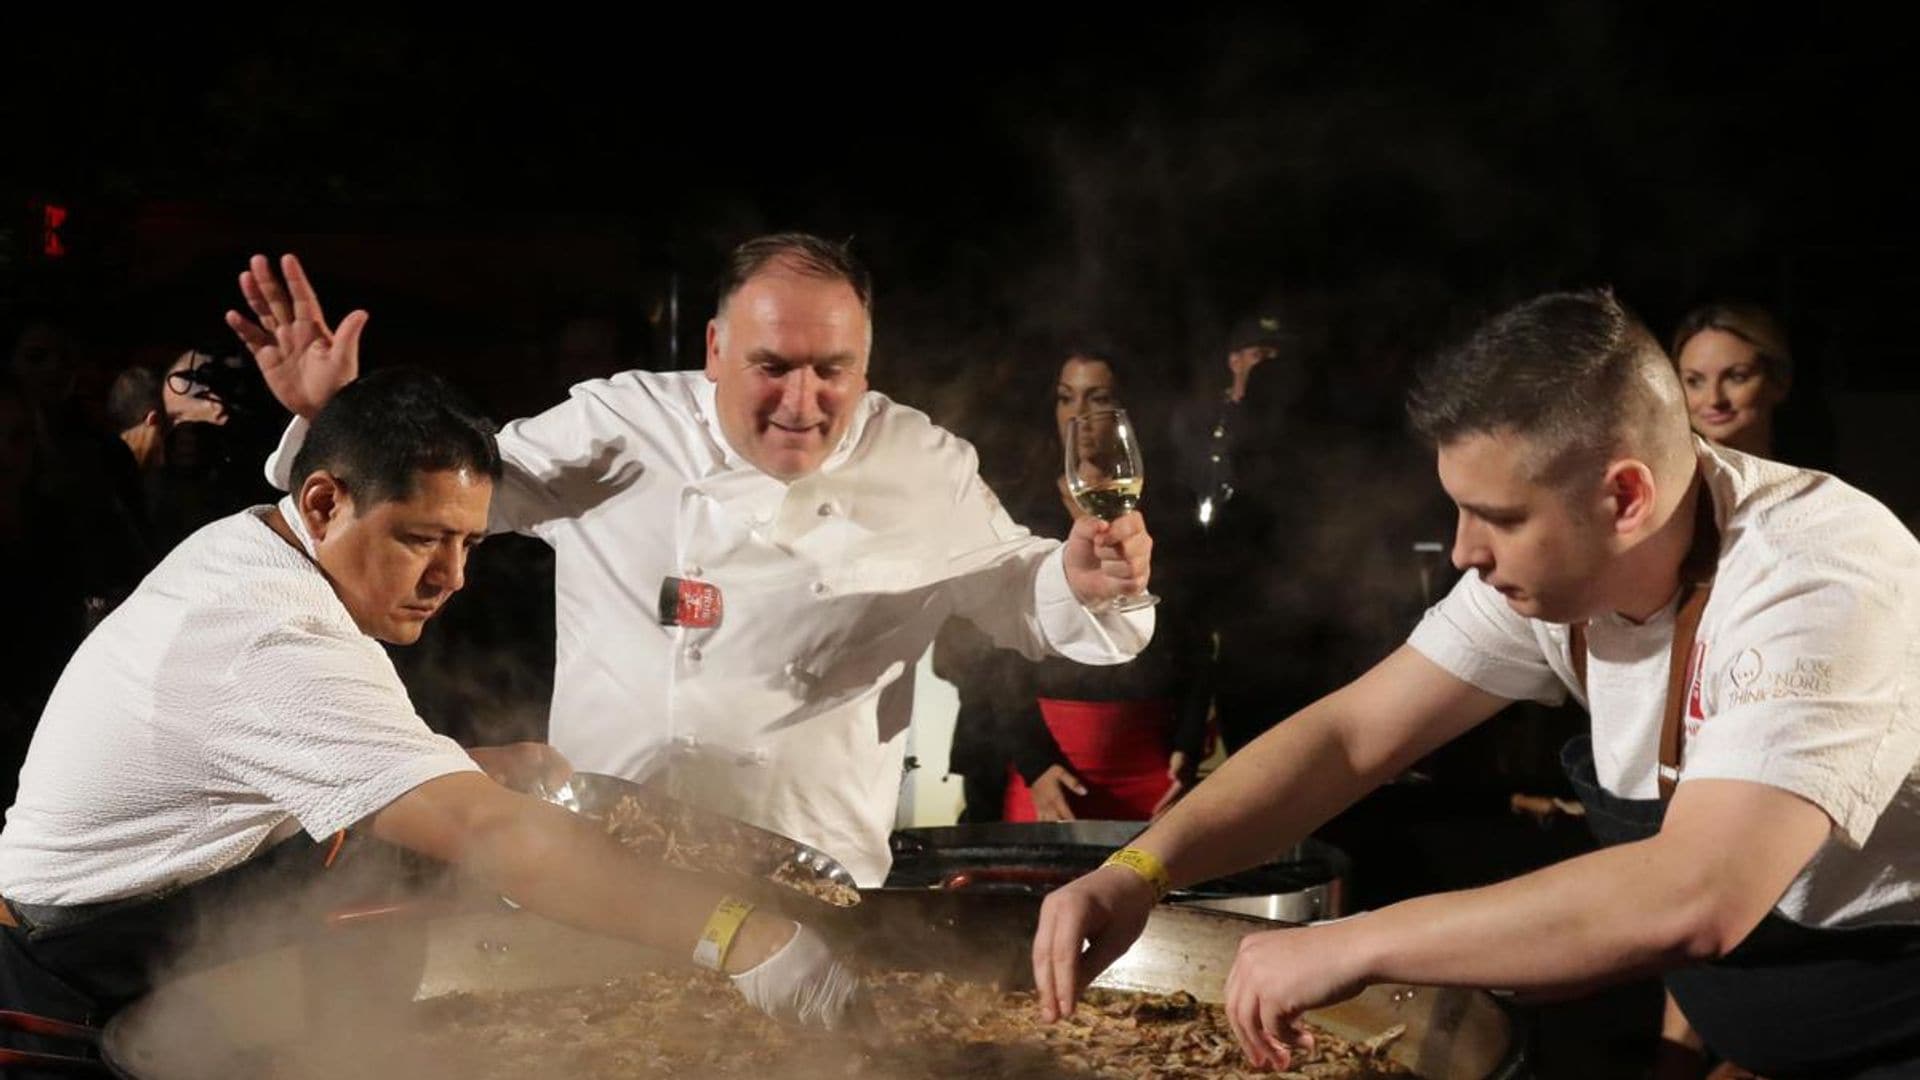 Chef José Andrés is sending paella to Earth’s orbit with Axiom Space’s private astronauts